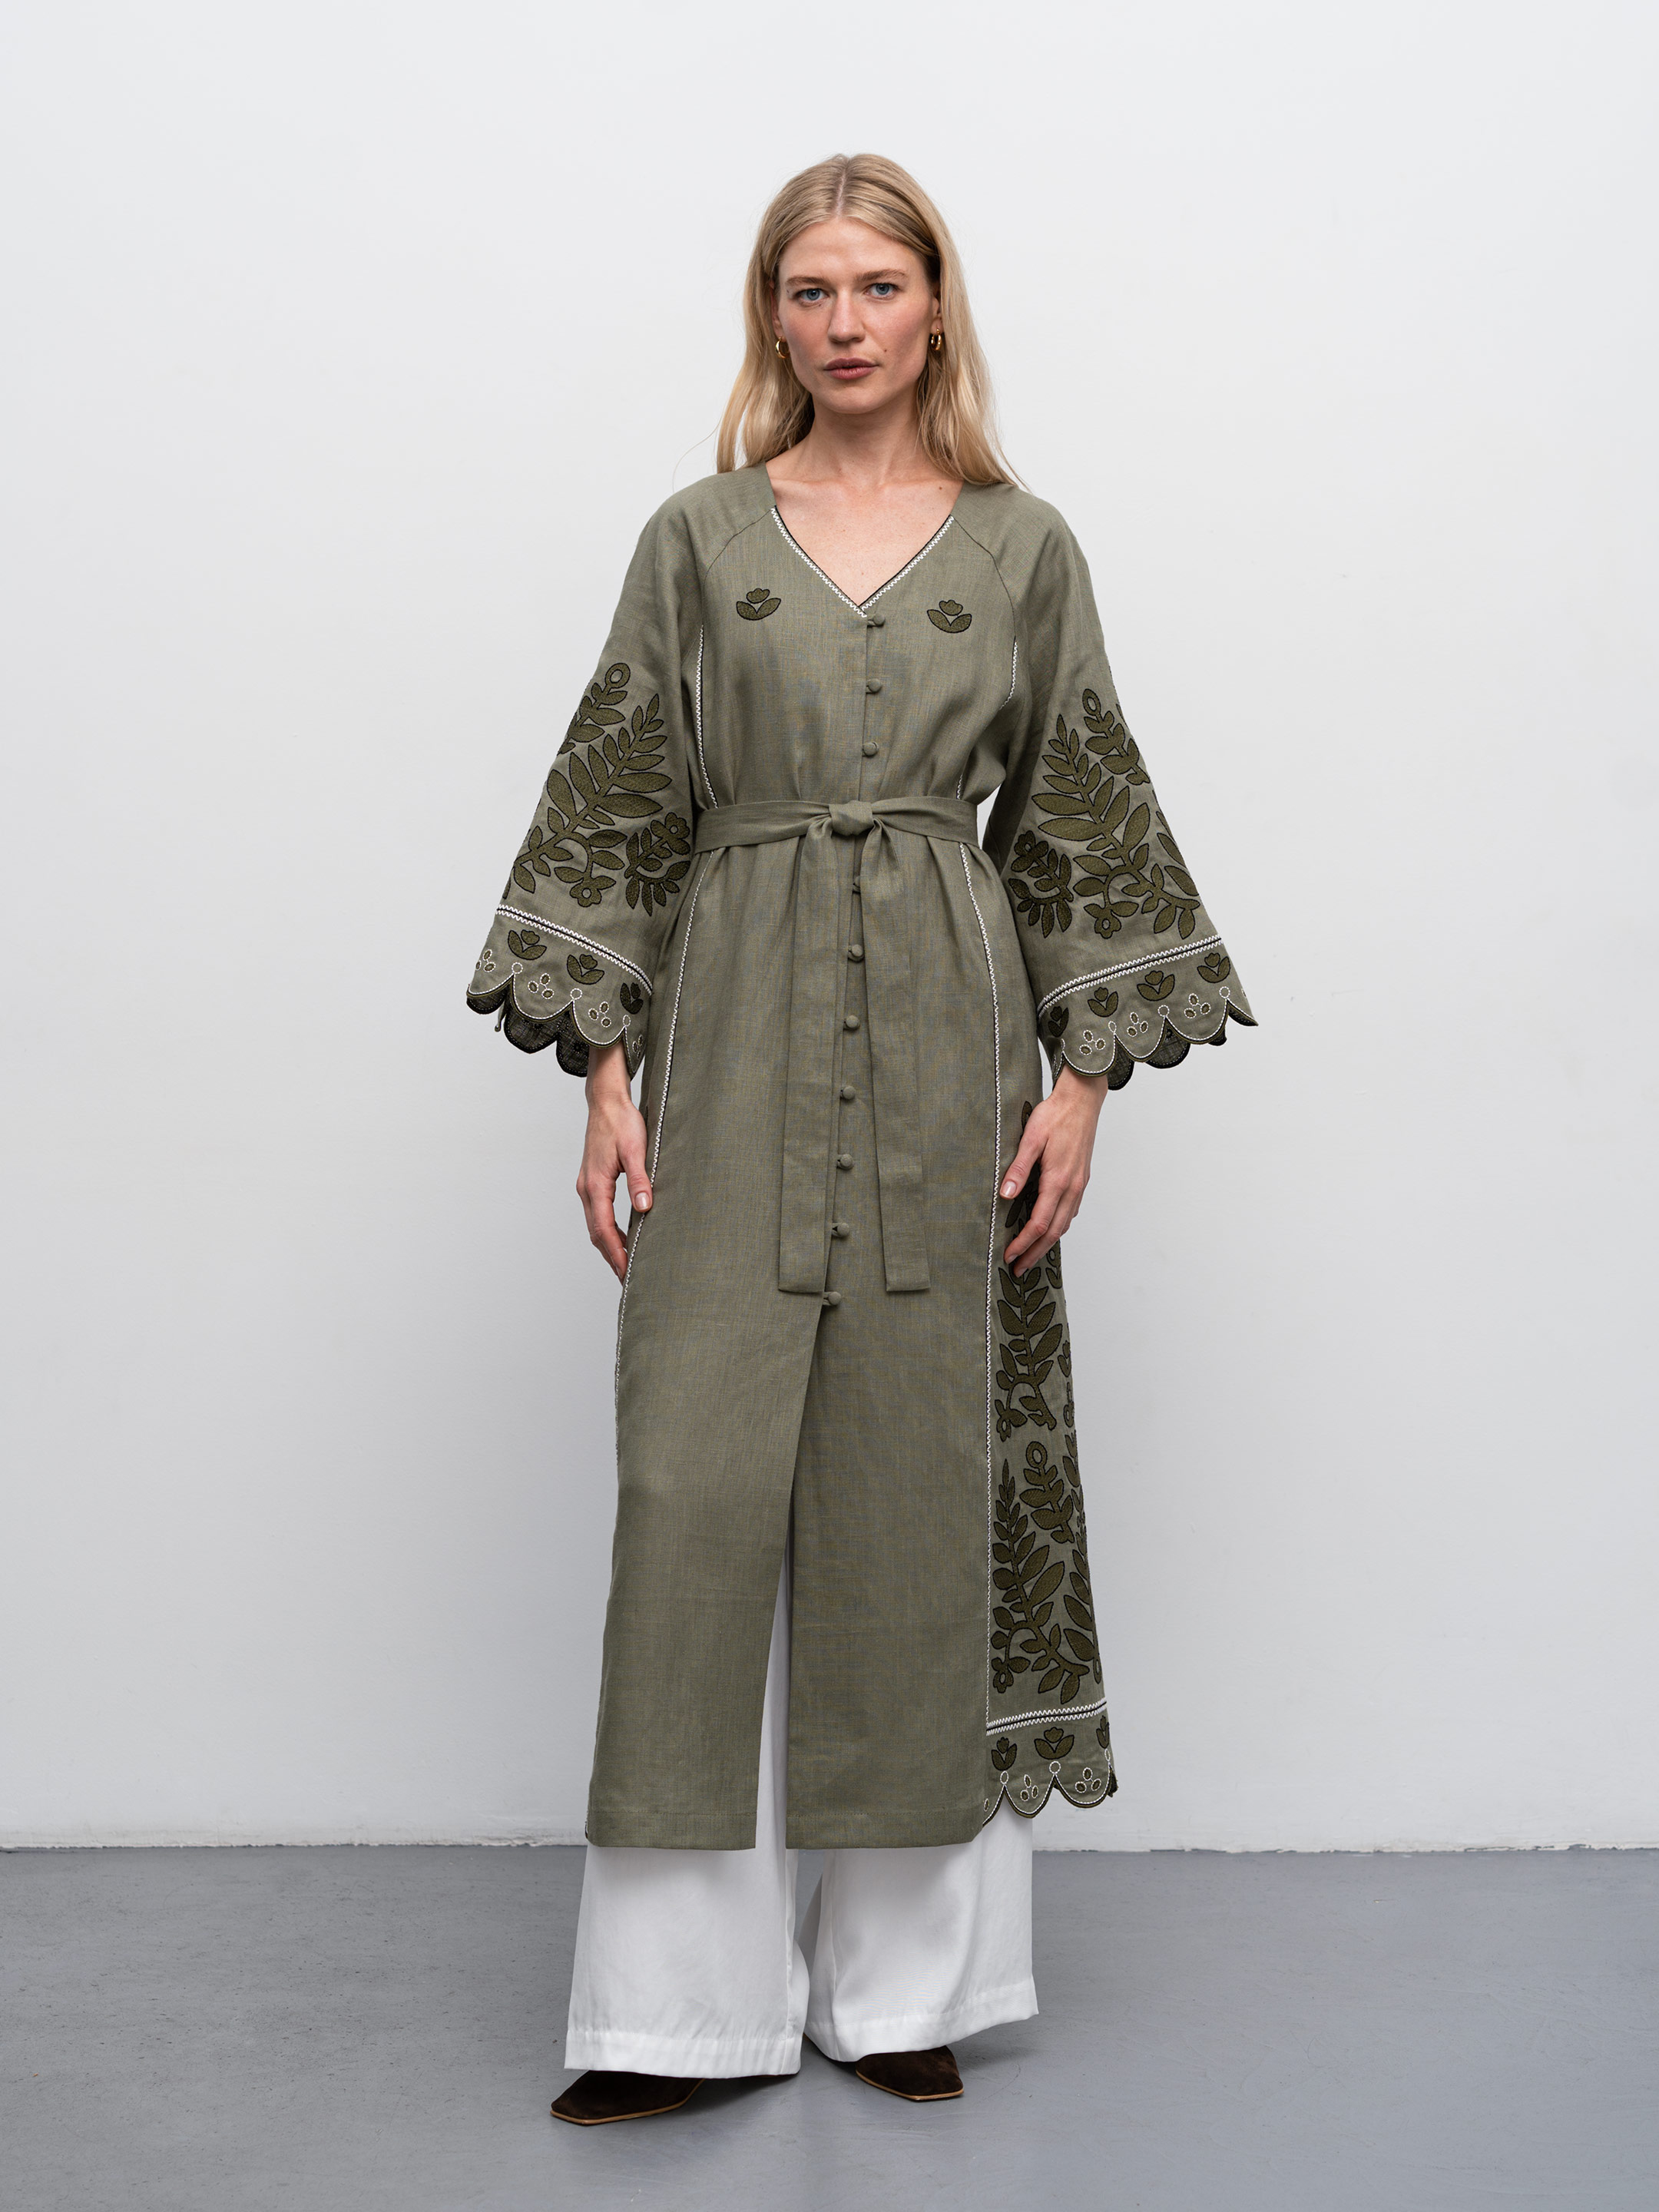 Linen embroidered dress with buttons Smereka - photo 1